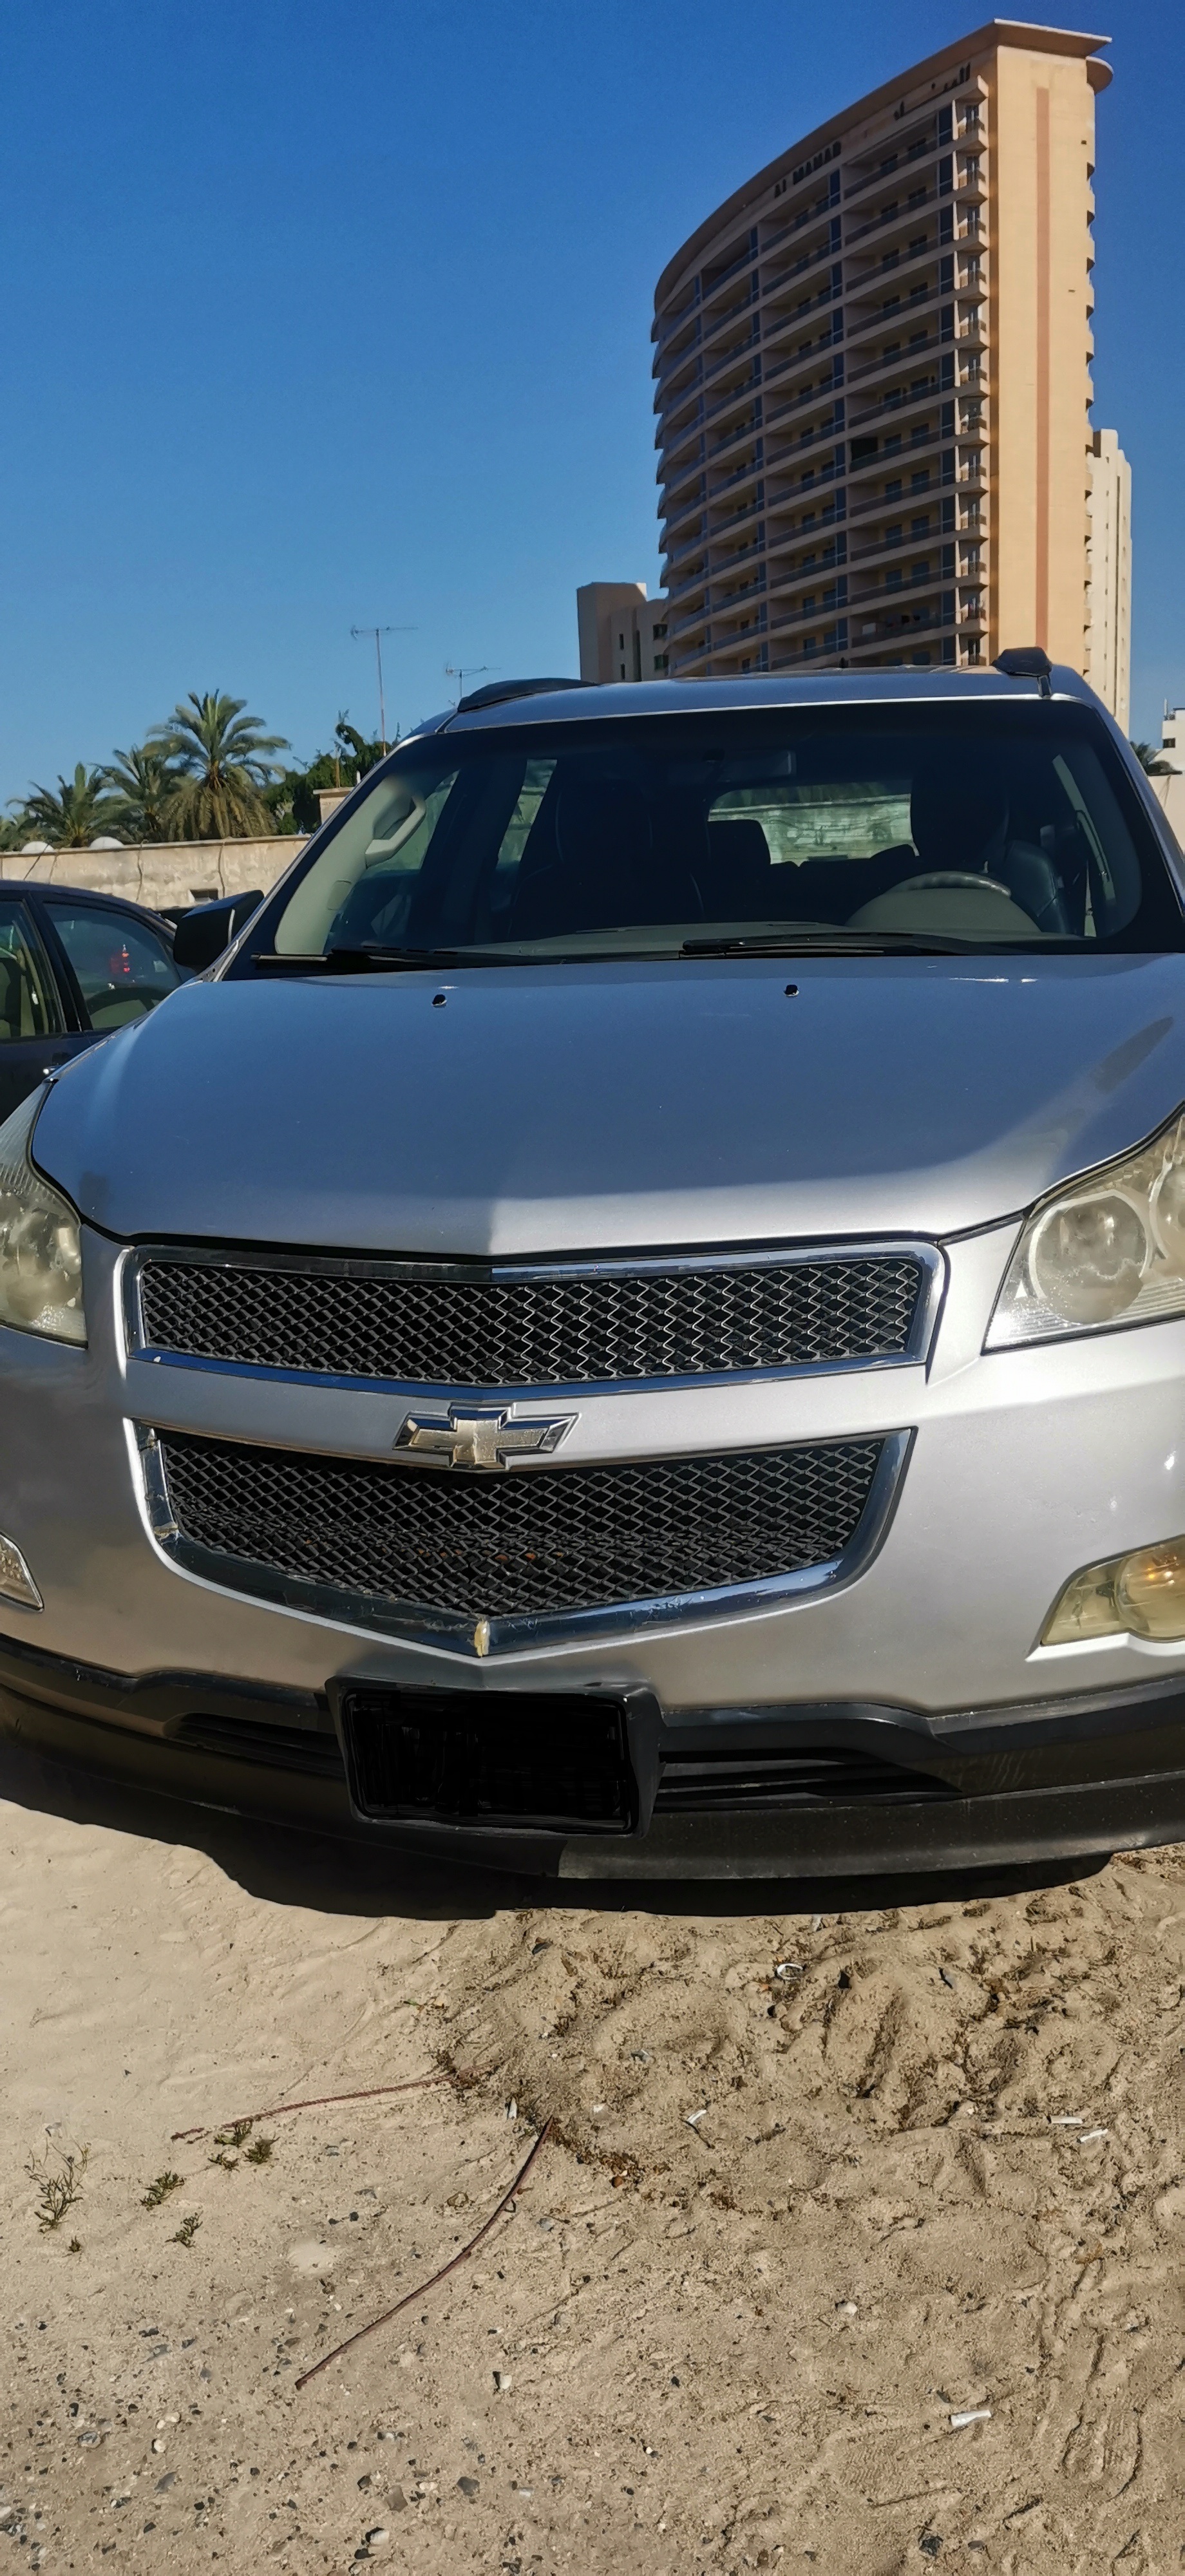 Chevrolet Traverse for sale 2012